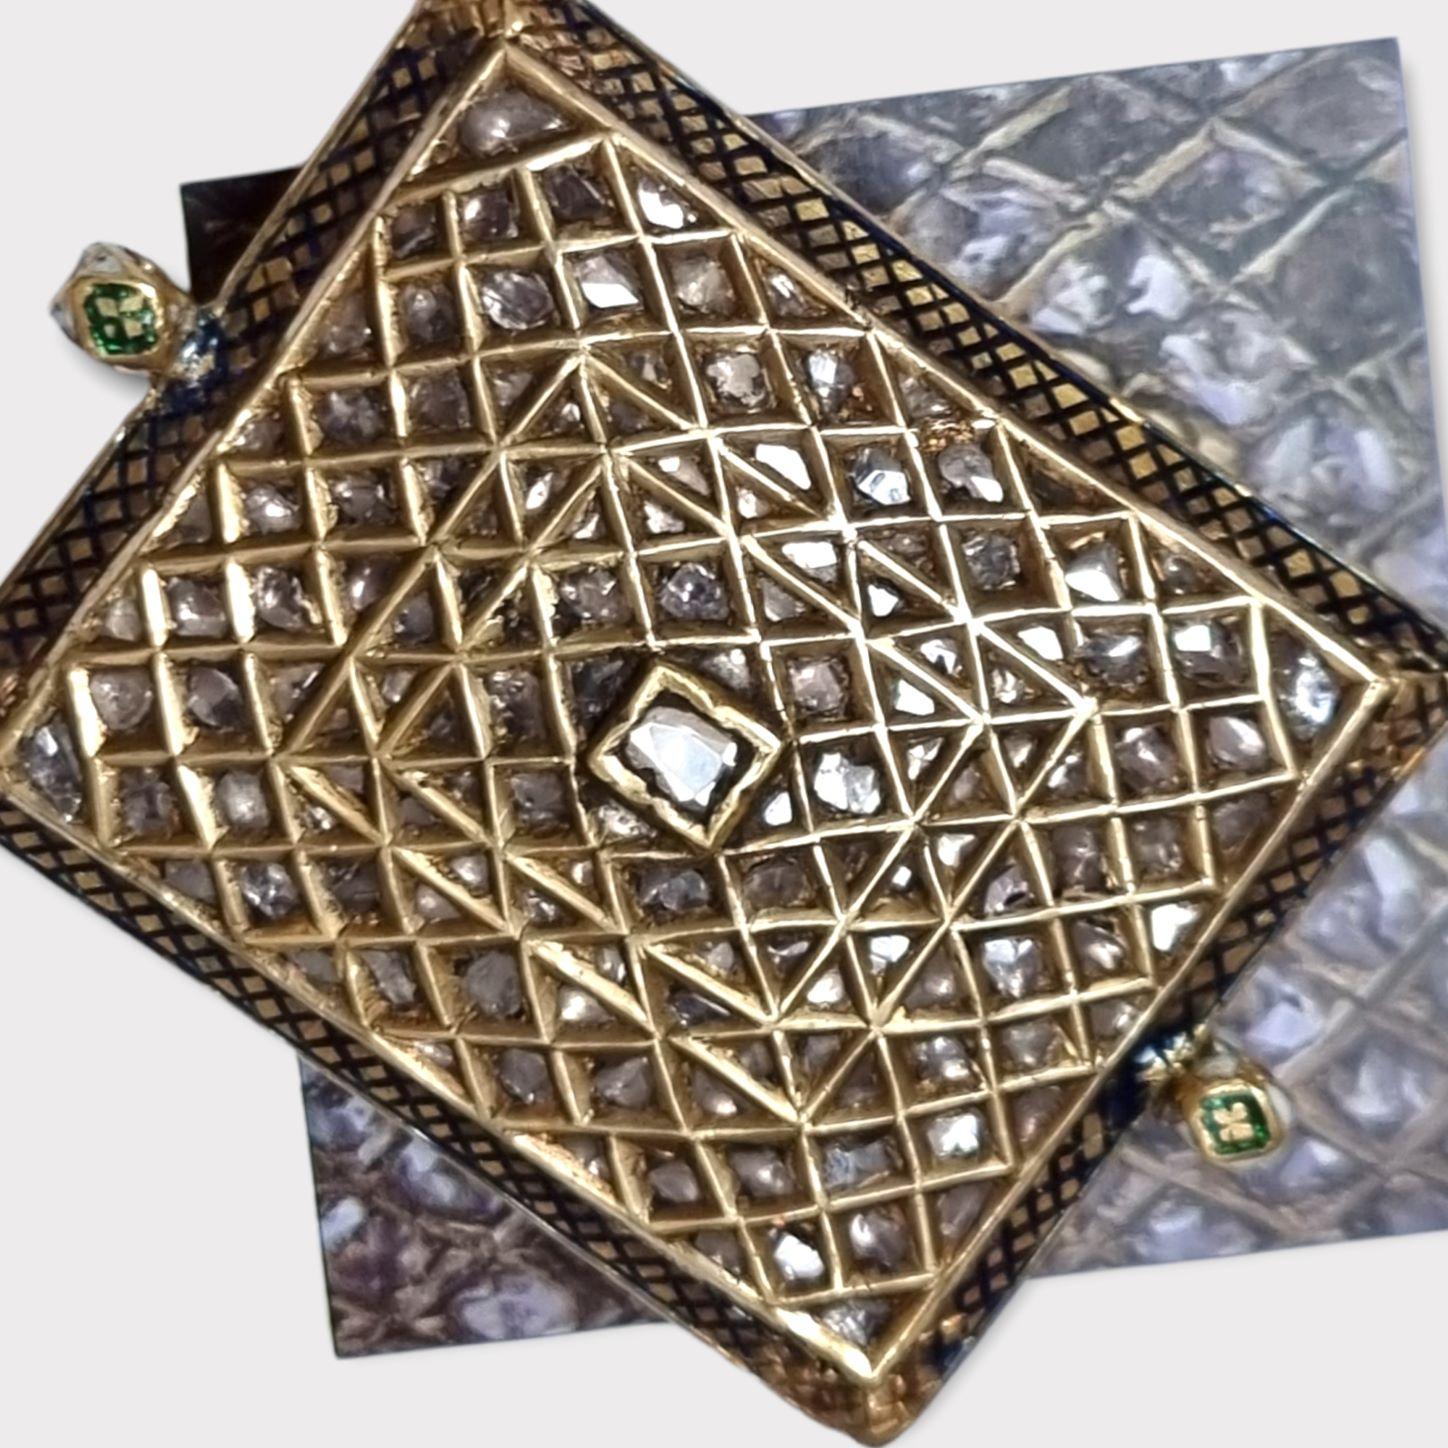 A DIAMOND-SET ENAMELLED GOLD BAZUBAND (Armband)
NORTH INDIA, 19TH CENTURY
Rectangular with cushion base and two suspension loops, the top set with diamonds in concentric bands, the outer border with navy blue enamel criss-cross design, verso